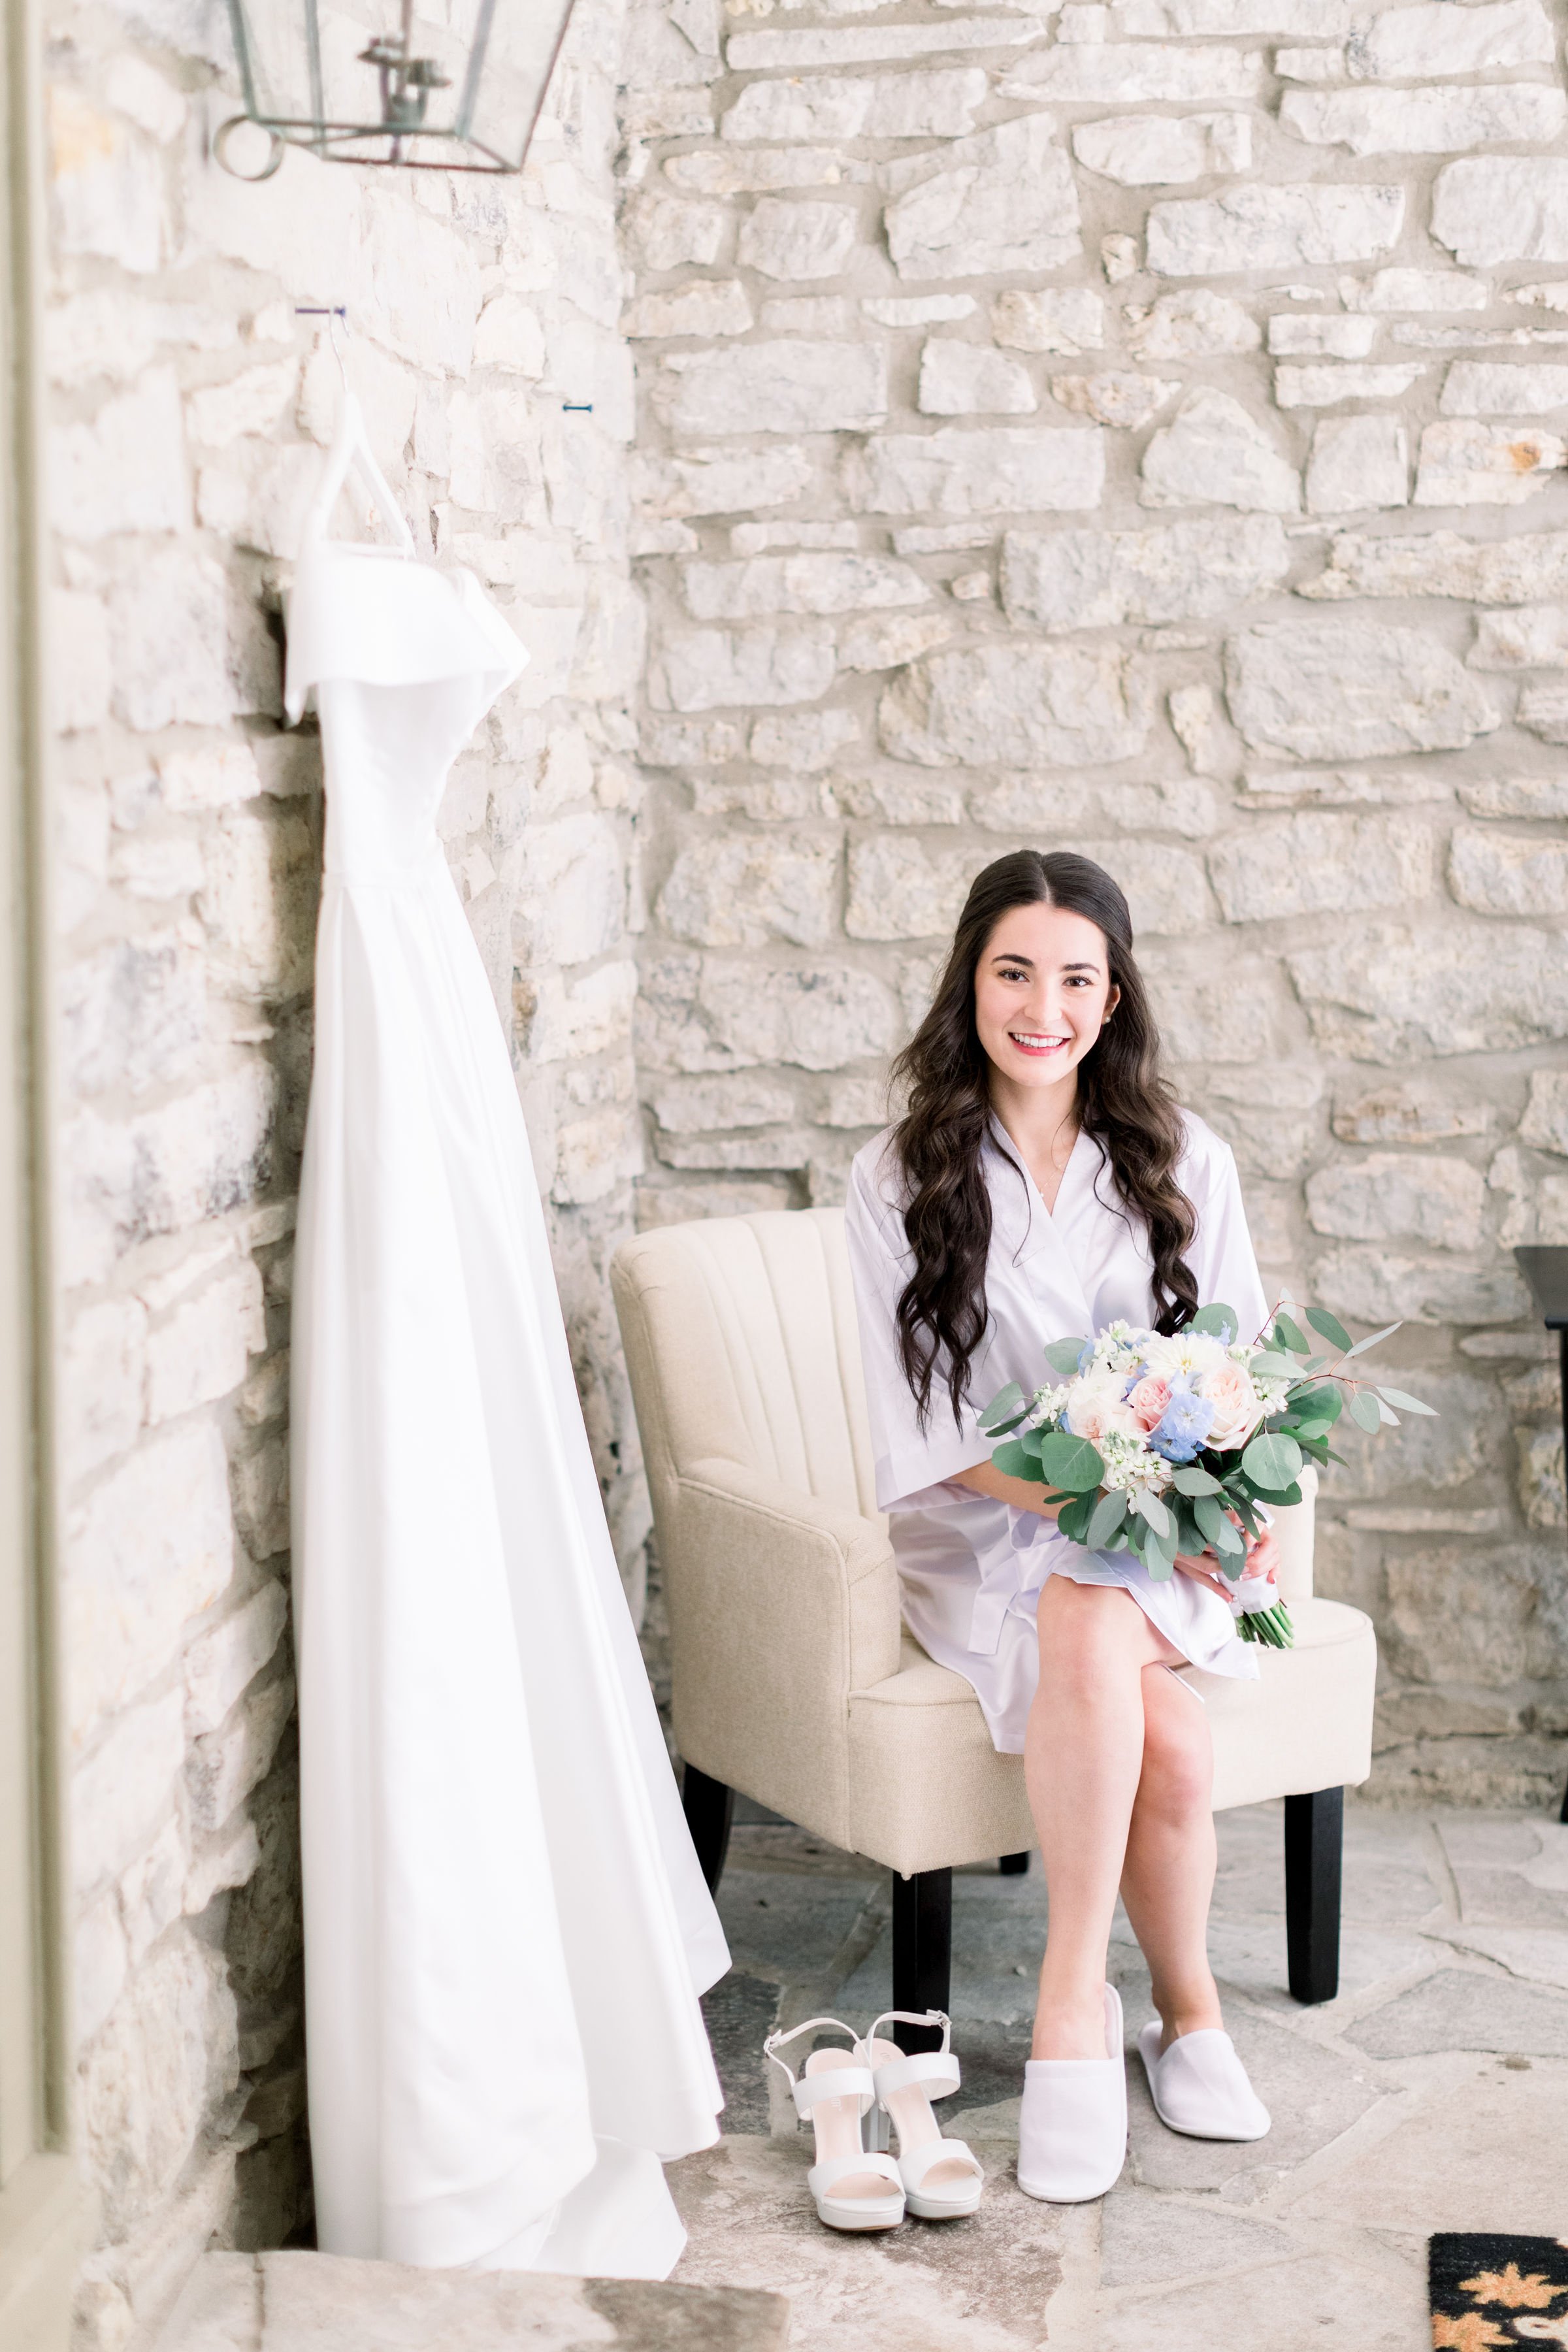  A bride in a stone room with her wedding dress and bouquet getting ready by Chelsea Mason Photography. bridal room wedding gown #Chelseamasonphotography #Chelseamasonweddings #Onatarioweddings #EvermoreweddingsAlmonte #Ontarioweddingphotographers 